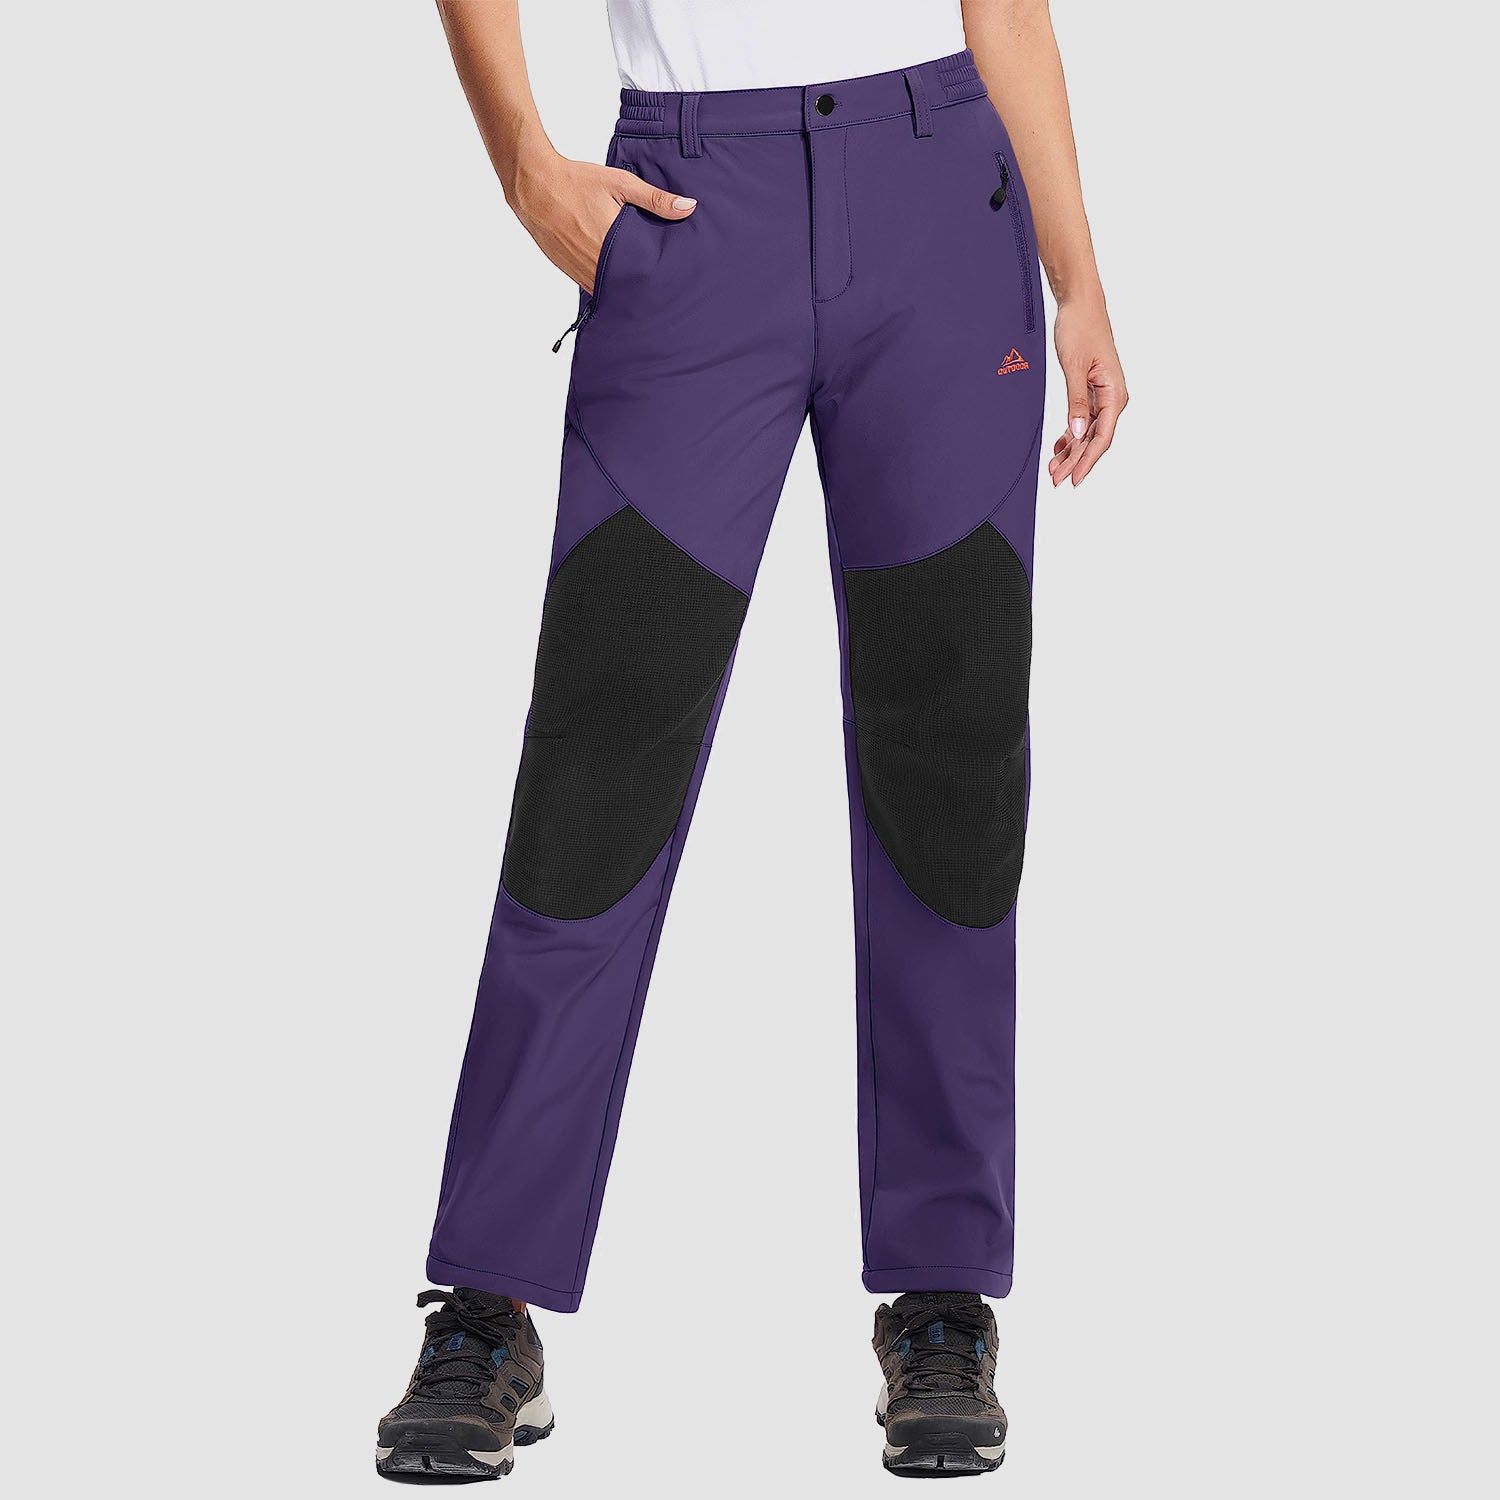 Women's Fleece Lined Pants Hiking Pants Trousers Solid Color Winter Outdoor  Thermal Warm Pants / Trousers Violet Fuchsia Grey Green Black Ski /  Snowboard Fishing Climbing S M L XL XXL 2023 - $28.99